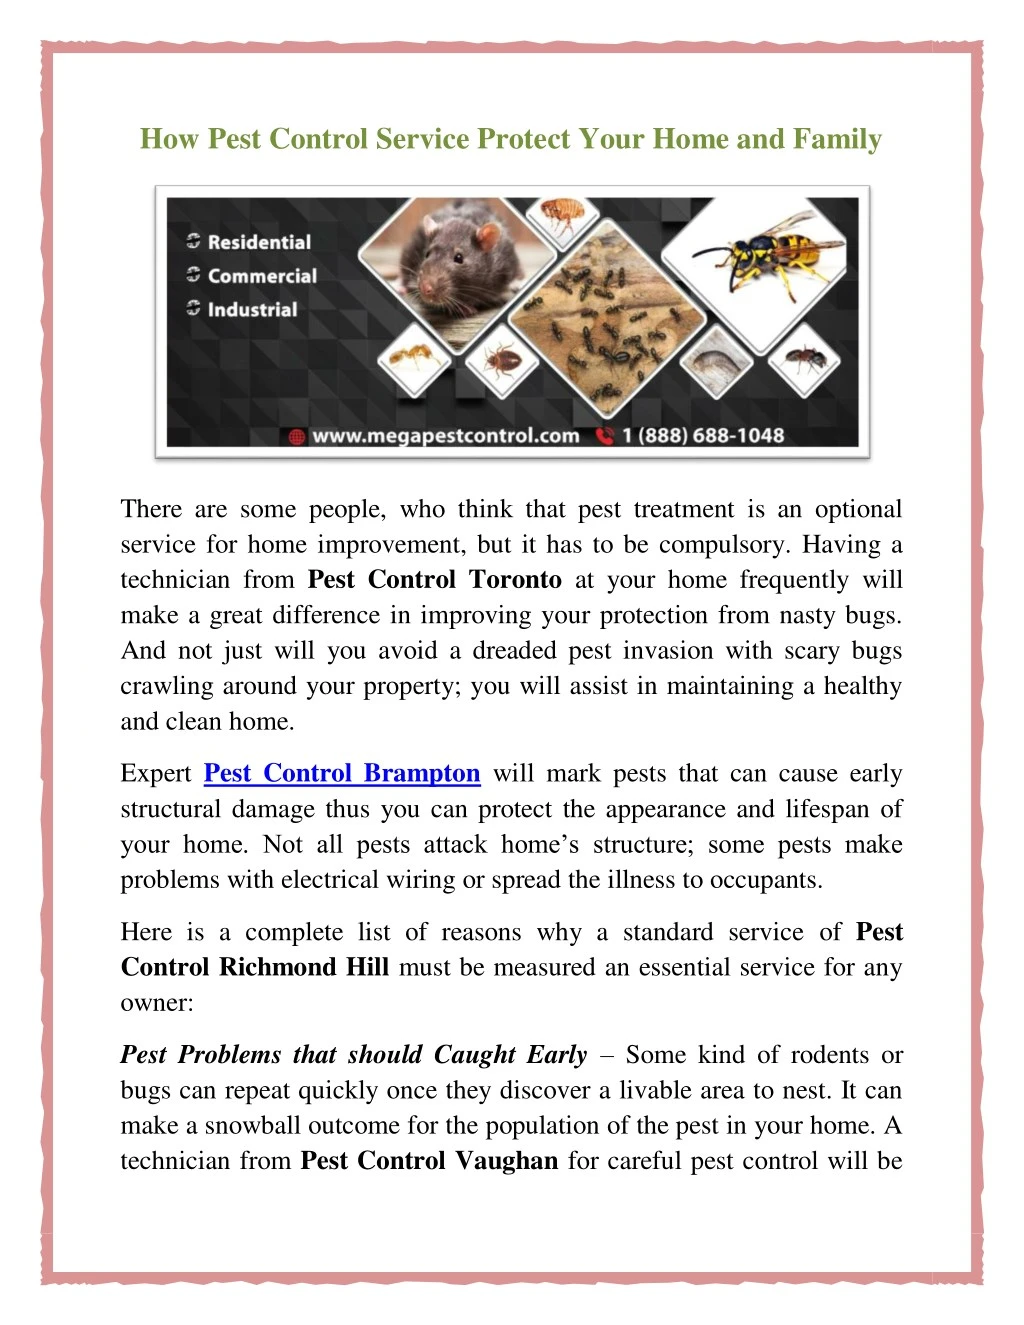 how pest control service protect your home